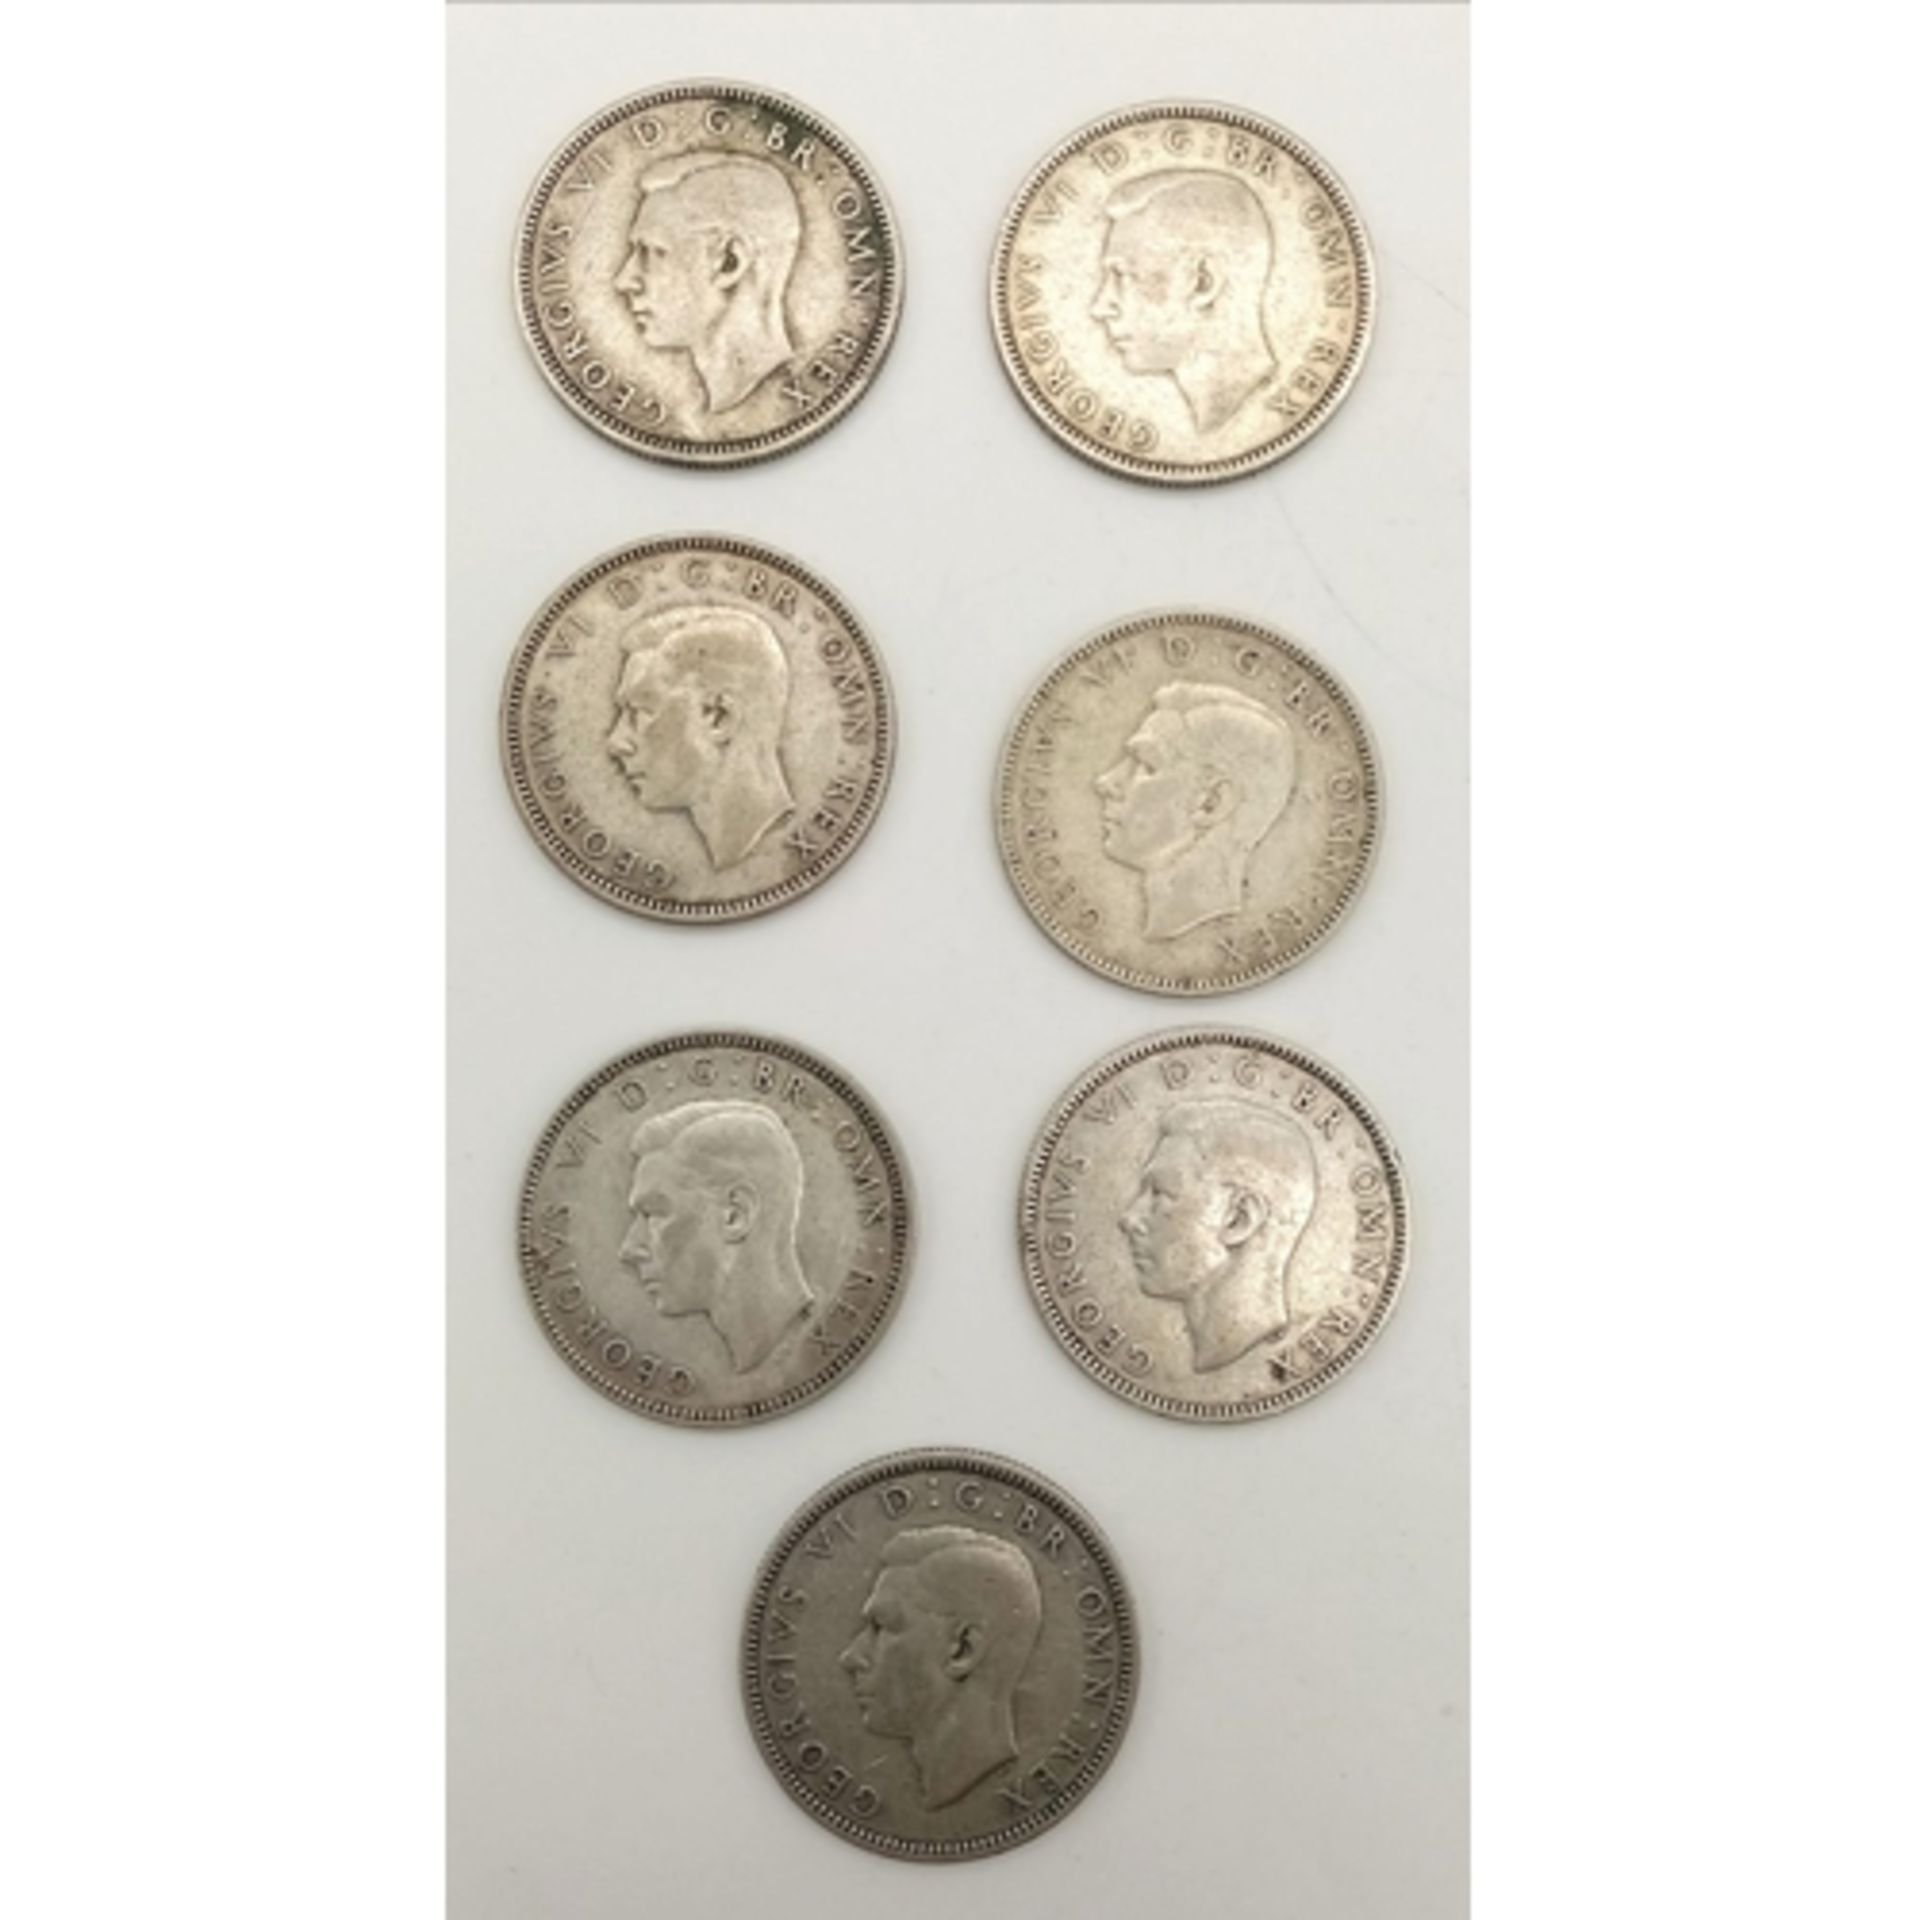 A Consecutive Run Date Set of 7 WW2 Period Silver Shillings Dates 1939-1945 Inclusive. All Fine to - Image 2 of 2